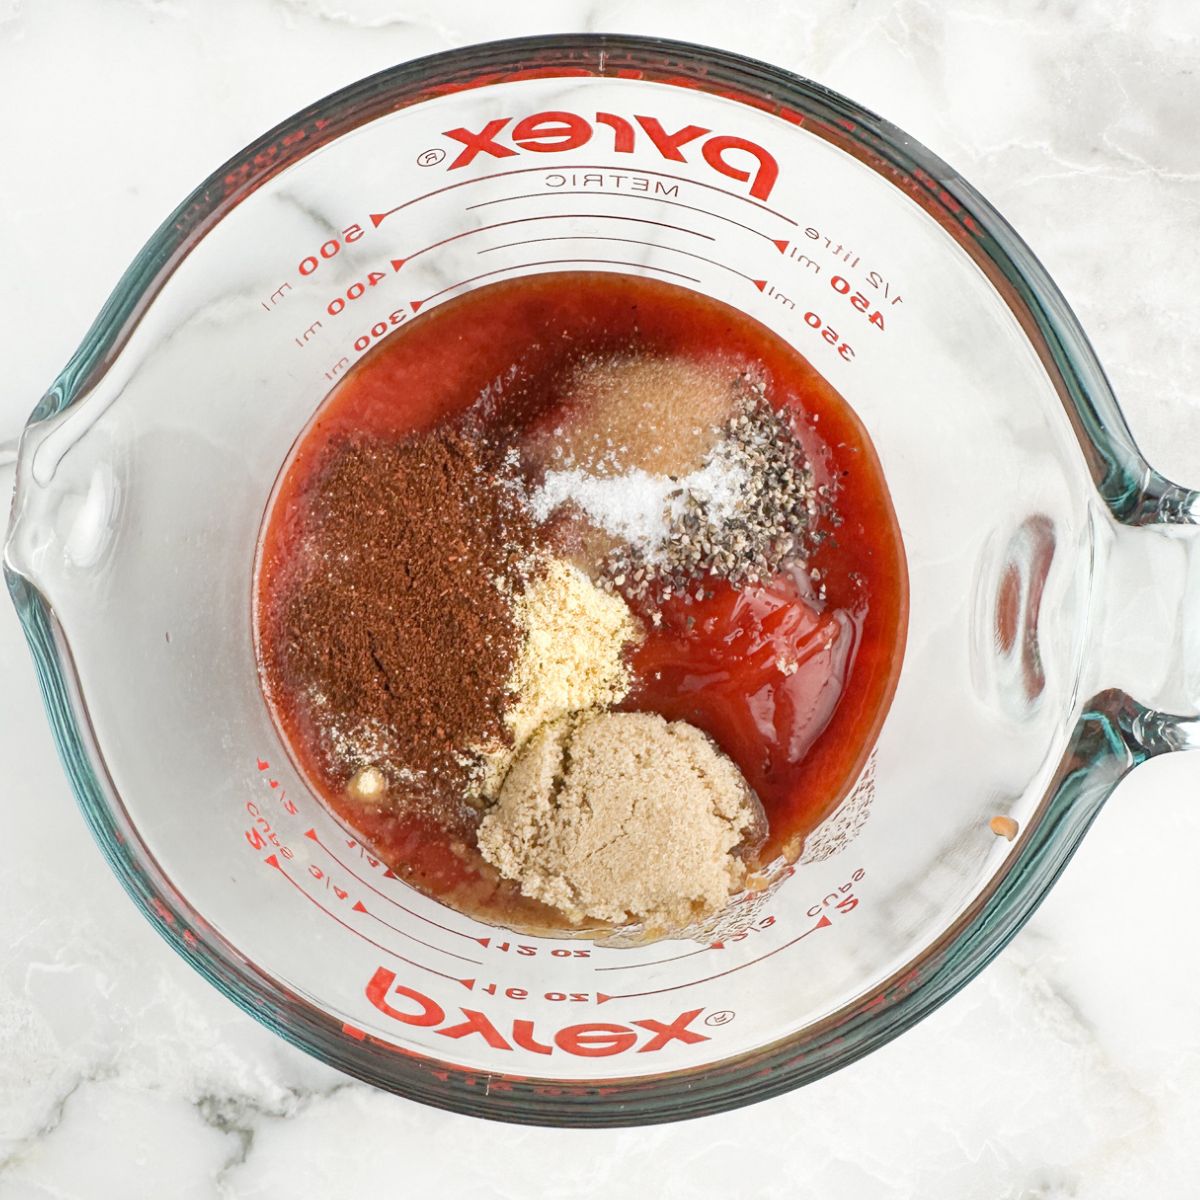 Measuring cup with tomato sauce, brown sugar, and seasonings. 